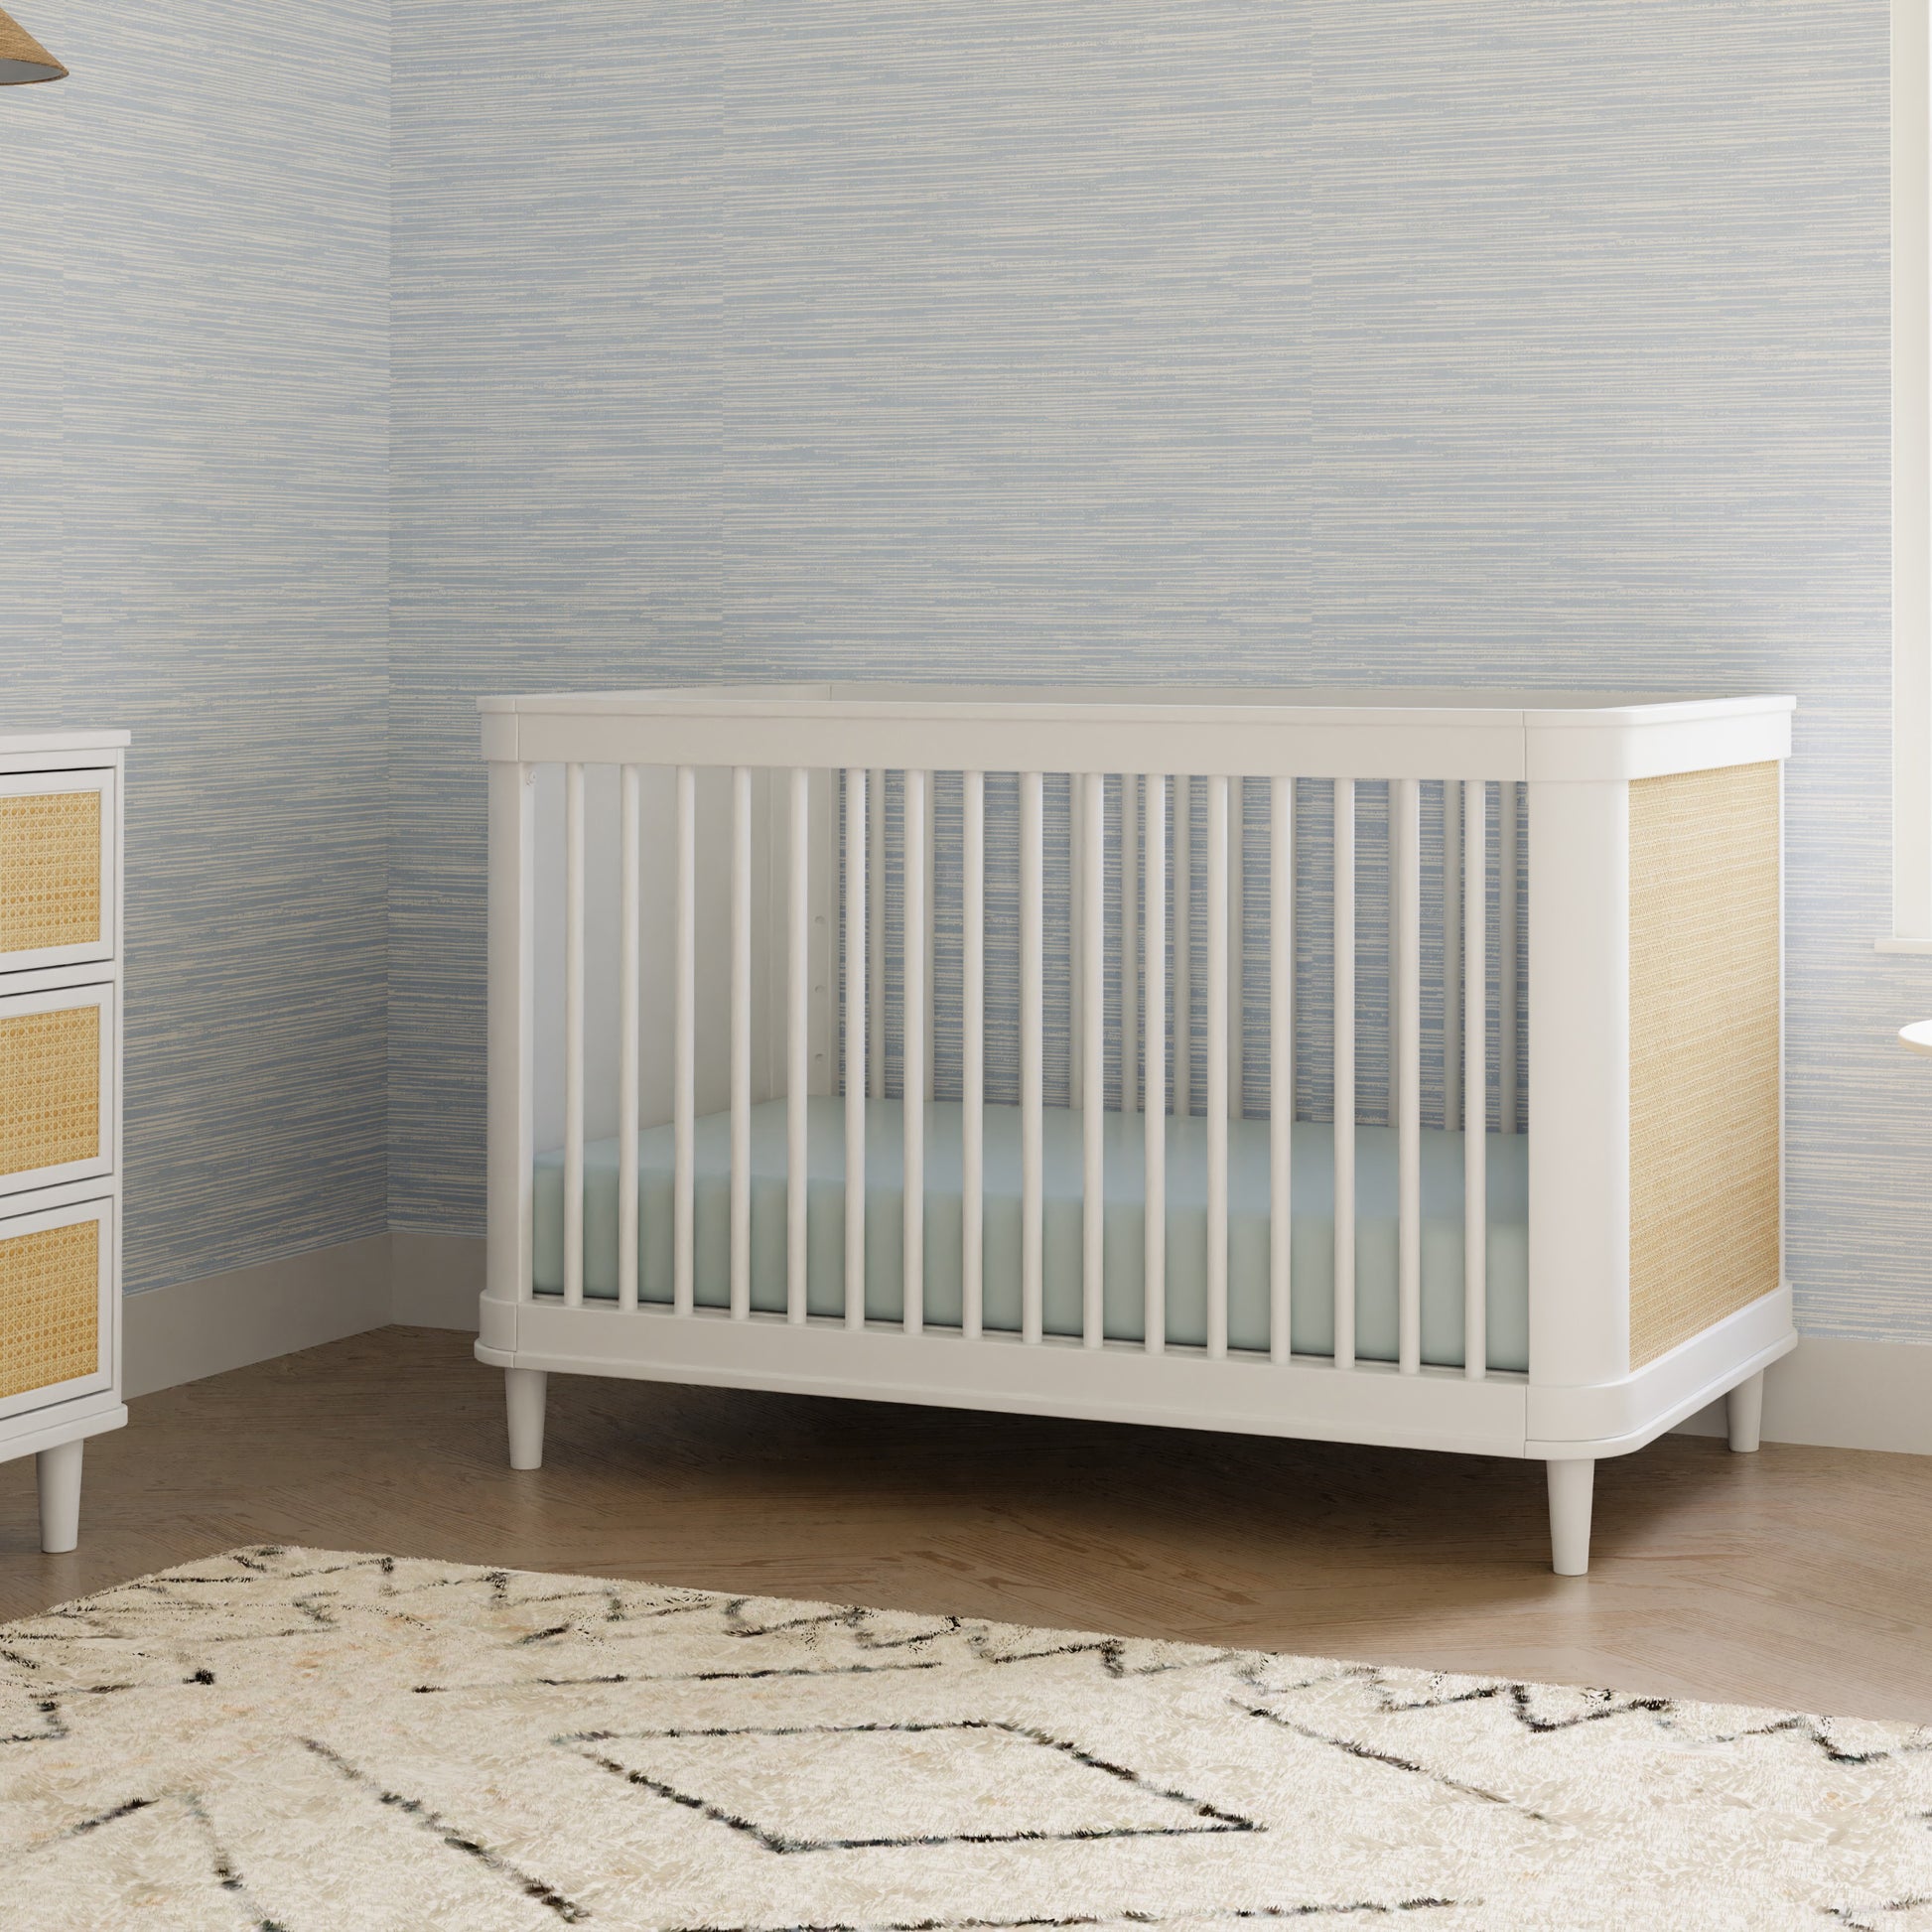 M23701RWHC,Marin with Cane 3-in-1 Convertible Crib in Warm White and Honey Cane